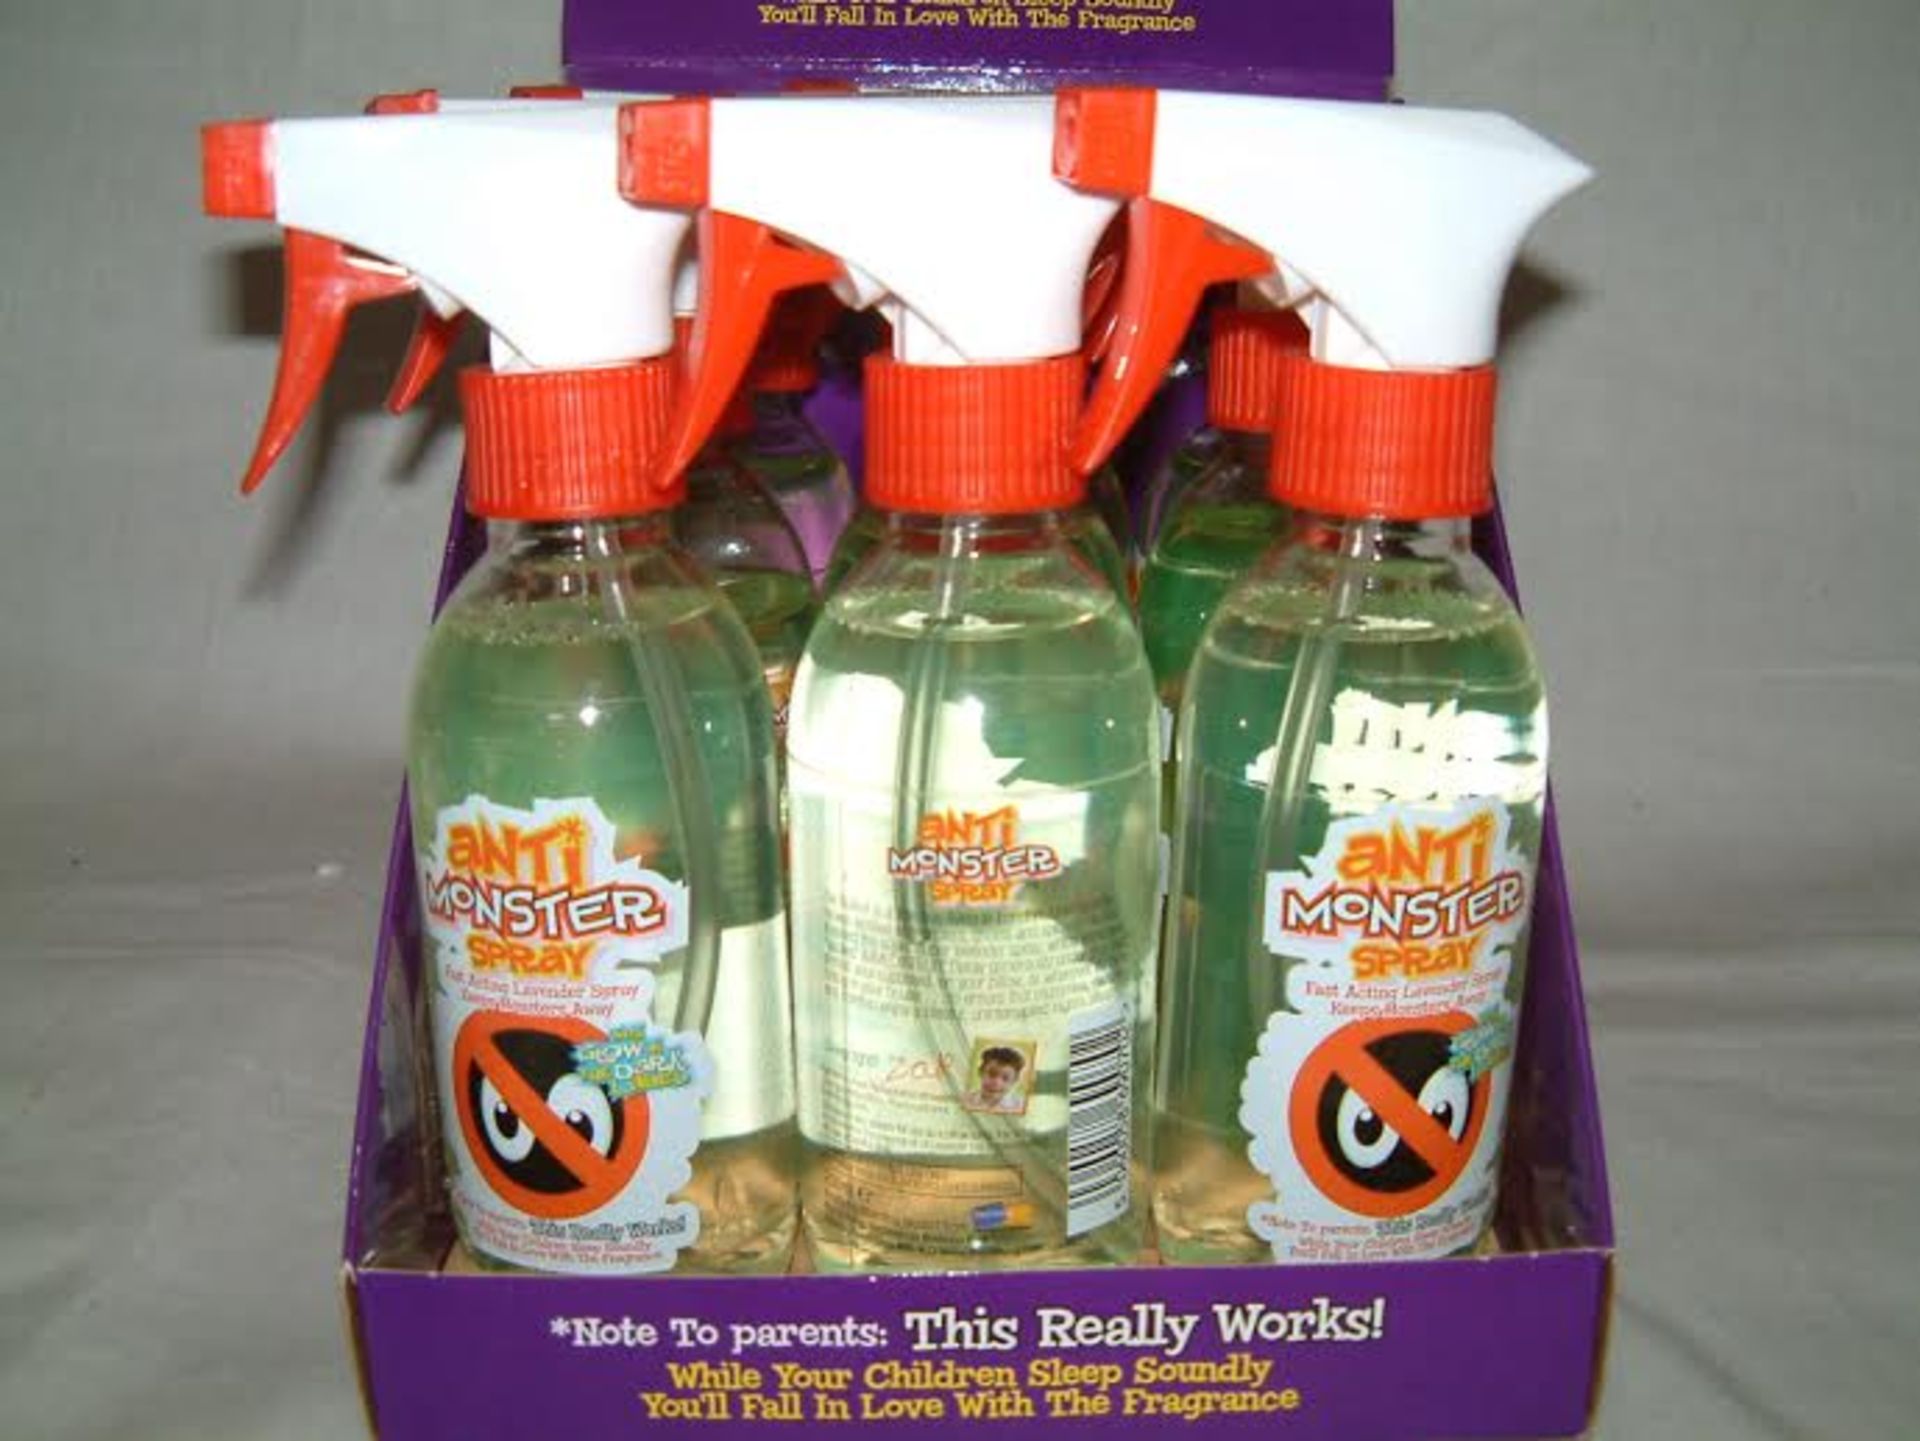 504 Bottles “Anti Monster Spray” (250ml). This is primarily for children that have a fear of the